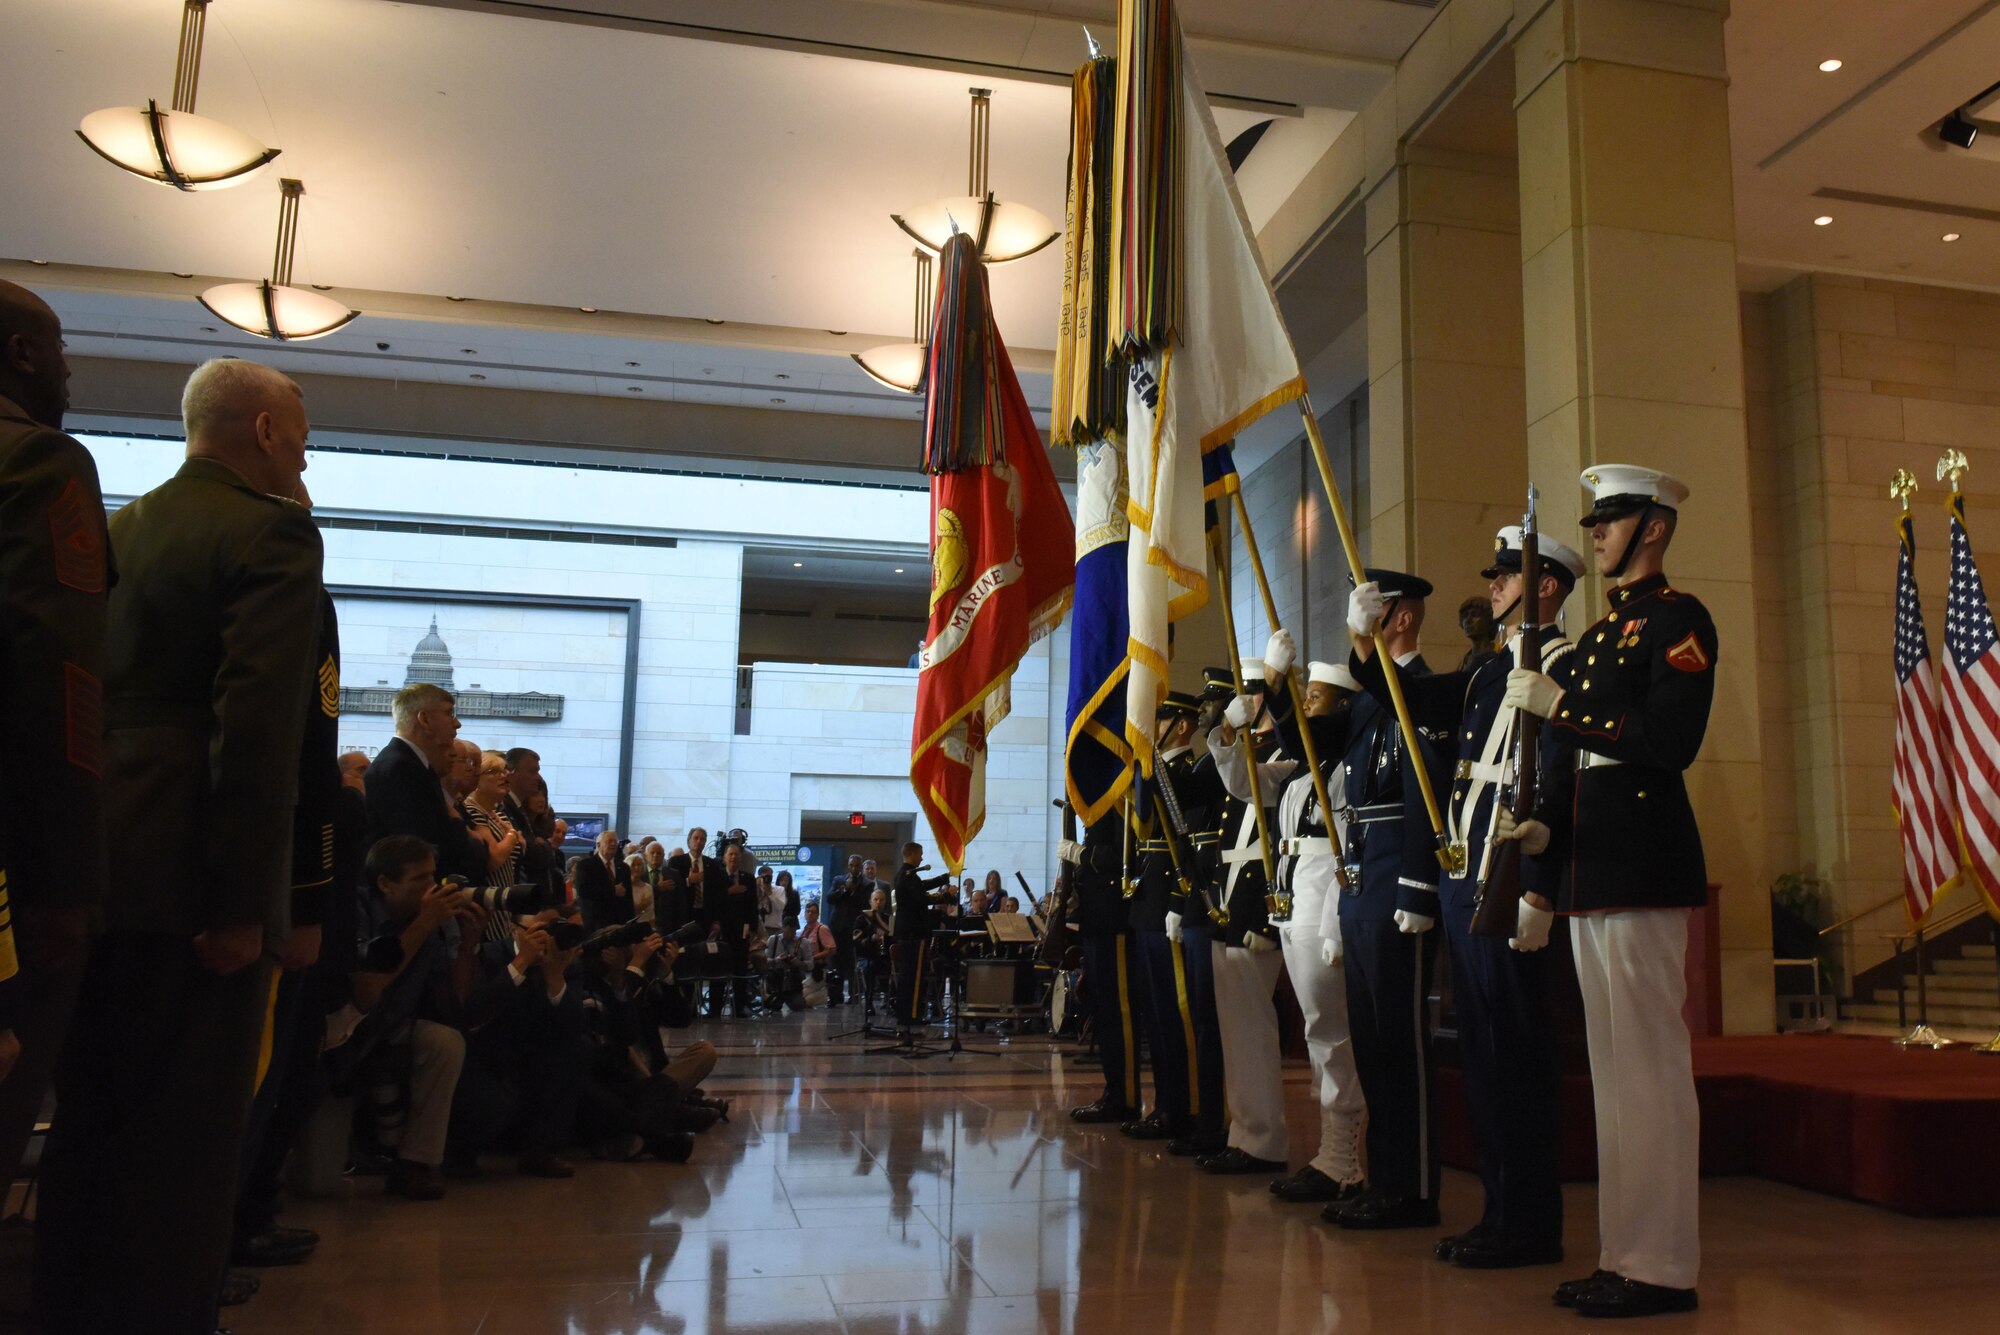 The Joint Service Color Guard presents the colors at the Congressional Commemoration for the 50th Anniversary of the Vietnam War July 8, 2015, in the Emancipation Hall of the U.S. Capitol in Washington. The commemoration honored all service members who fought and served during the Vietnam War. (U.S. Air Force photo/Staff Sgt. Carlin Leslie)